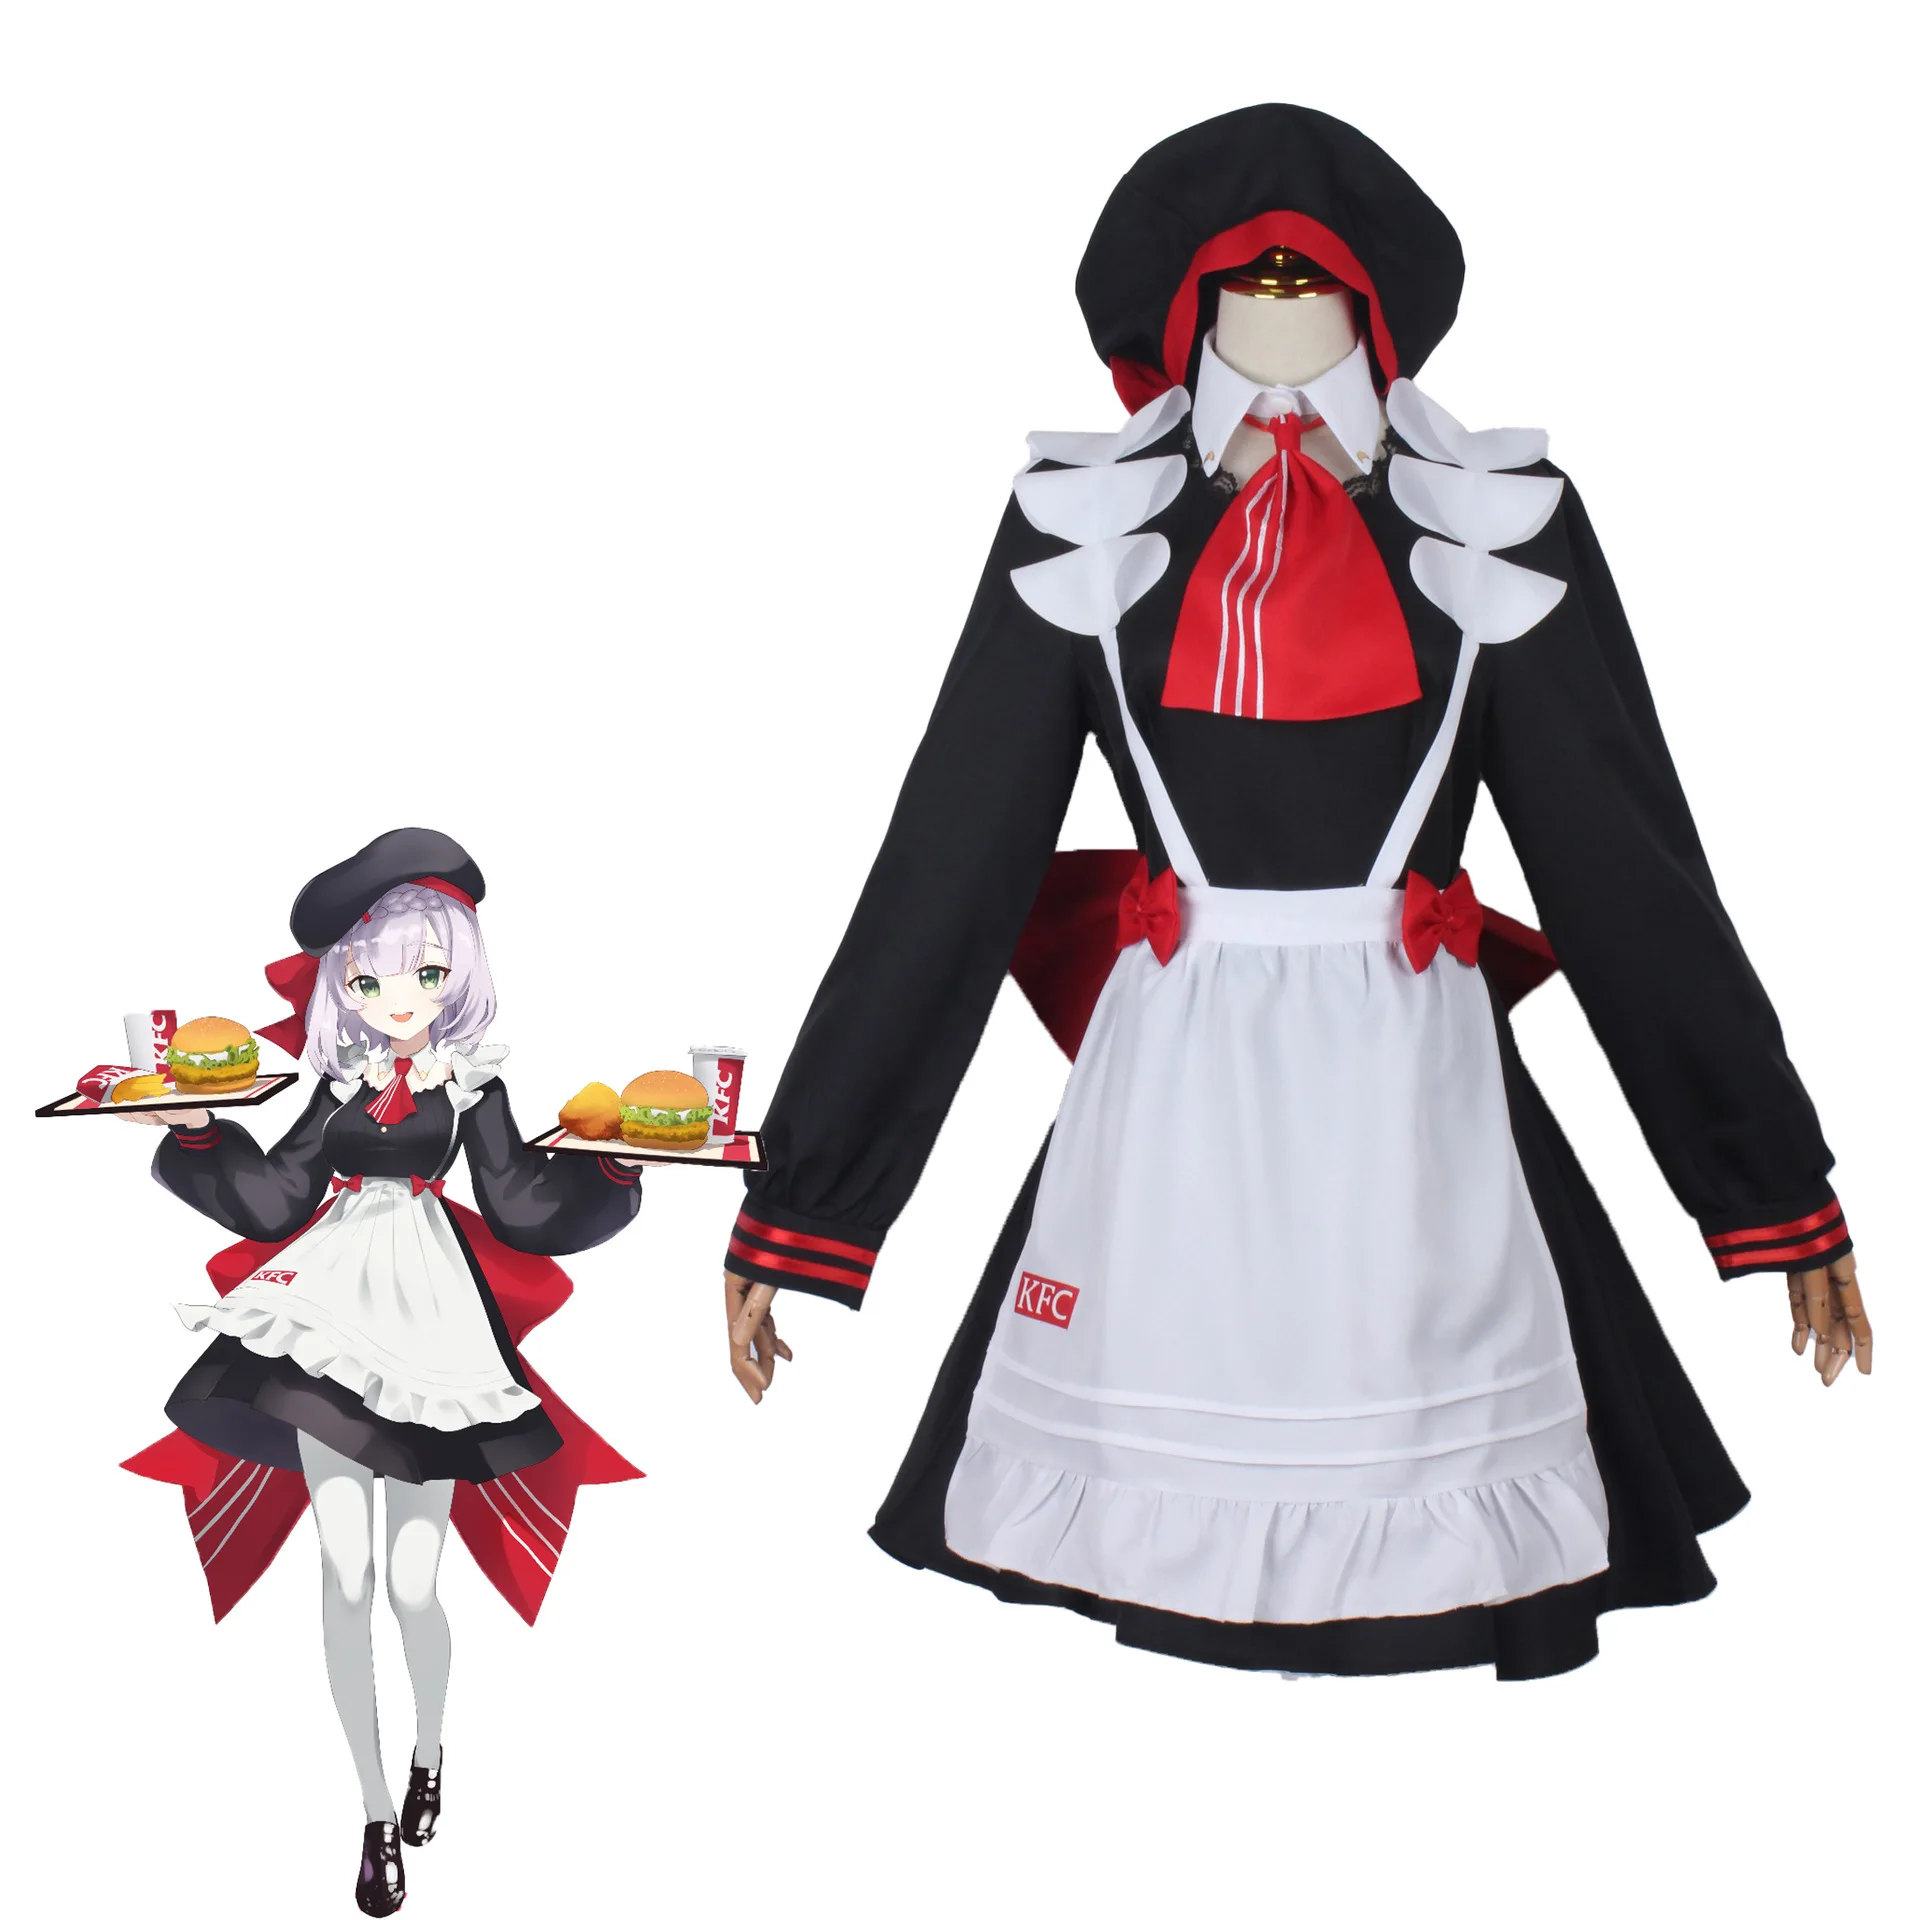 

Game Genshin Impact Noelle Cosplay Costumes Women Halloween Carnival Party Lolita Maid Uniform Full Sets Wig